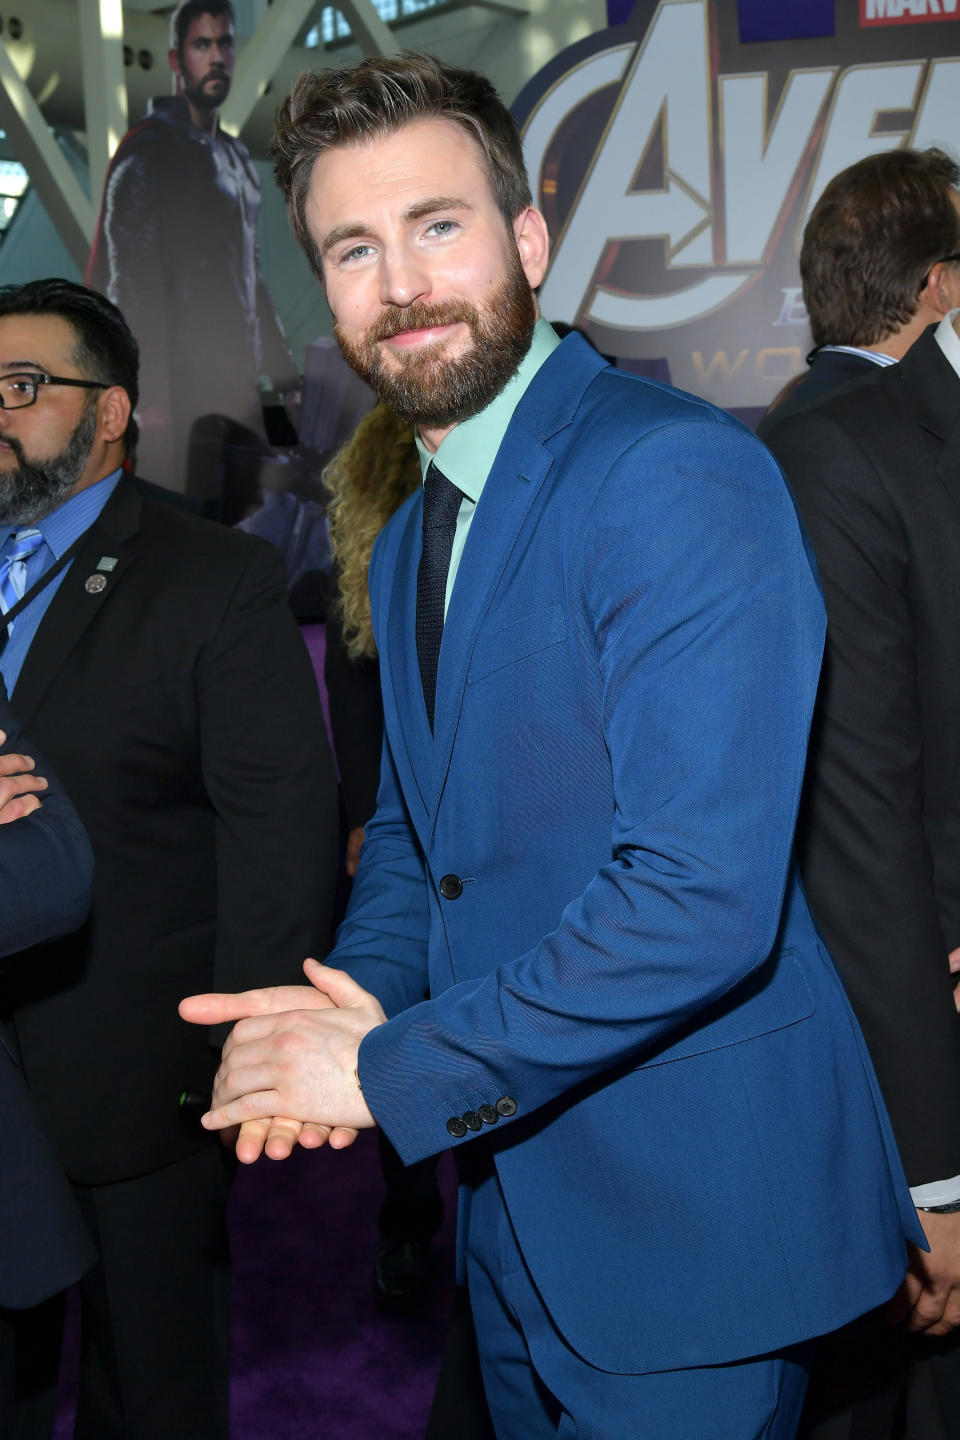 Evans at the "Avengers: Endgame" premiere in 2019